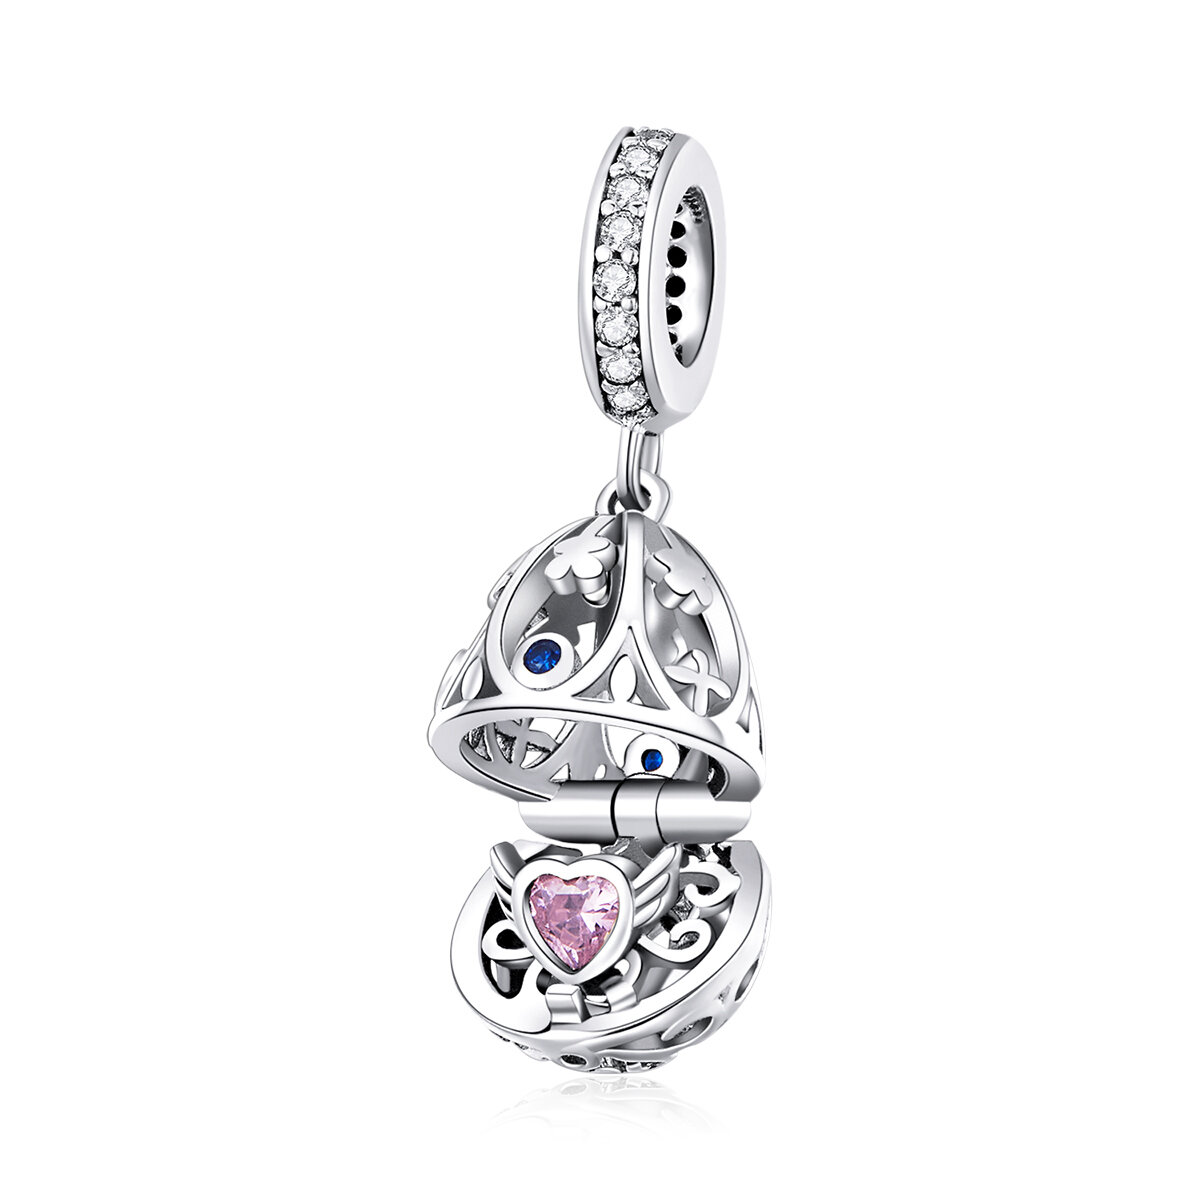 GemKing SCC1465 Easter egg with Treasure S925 Sterling Silver Charm